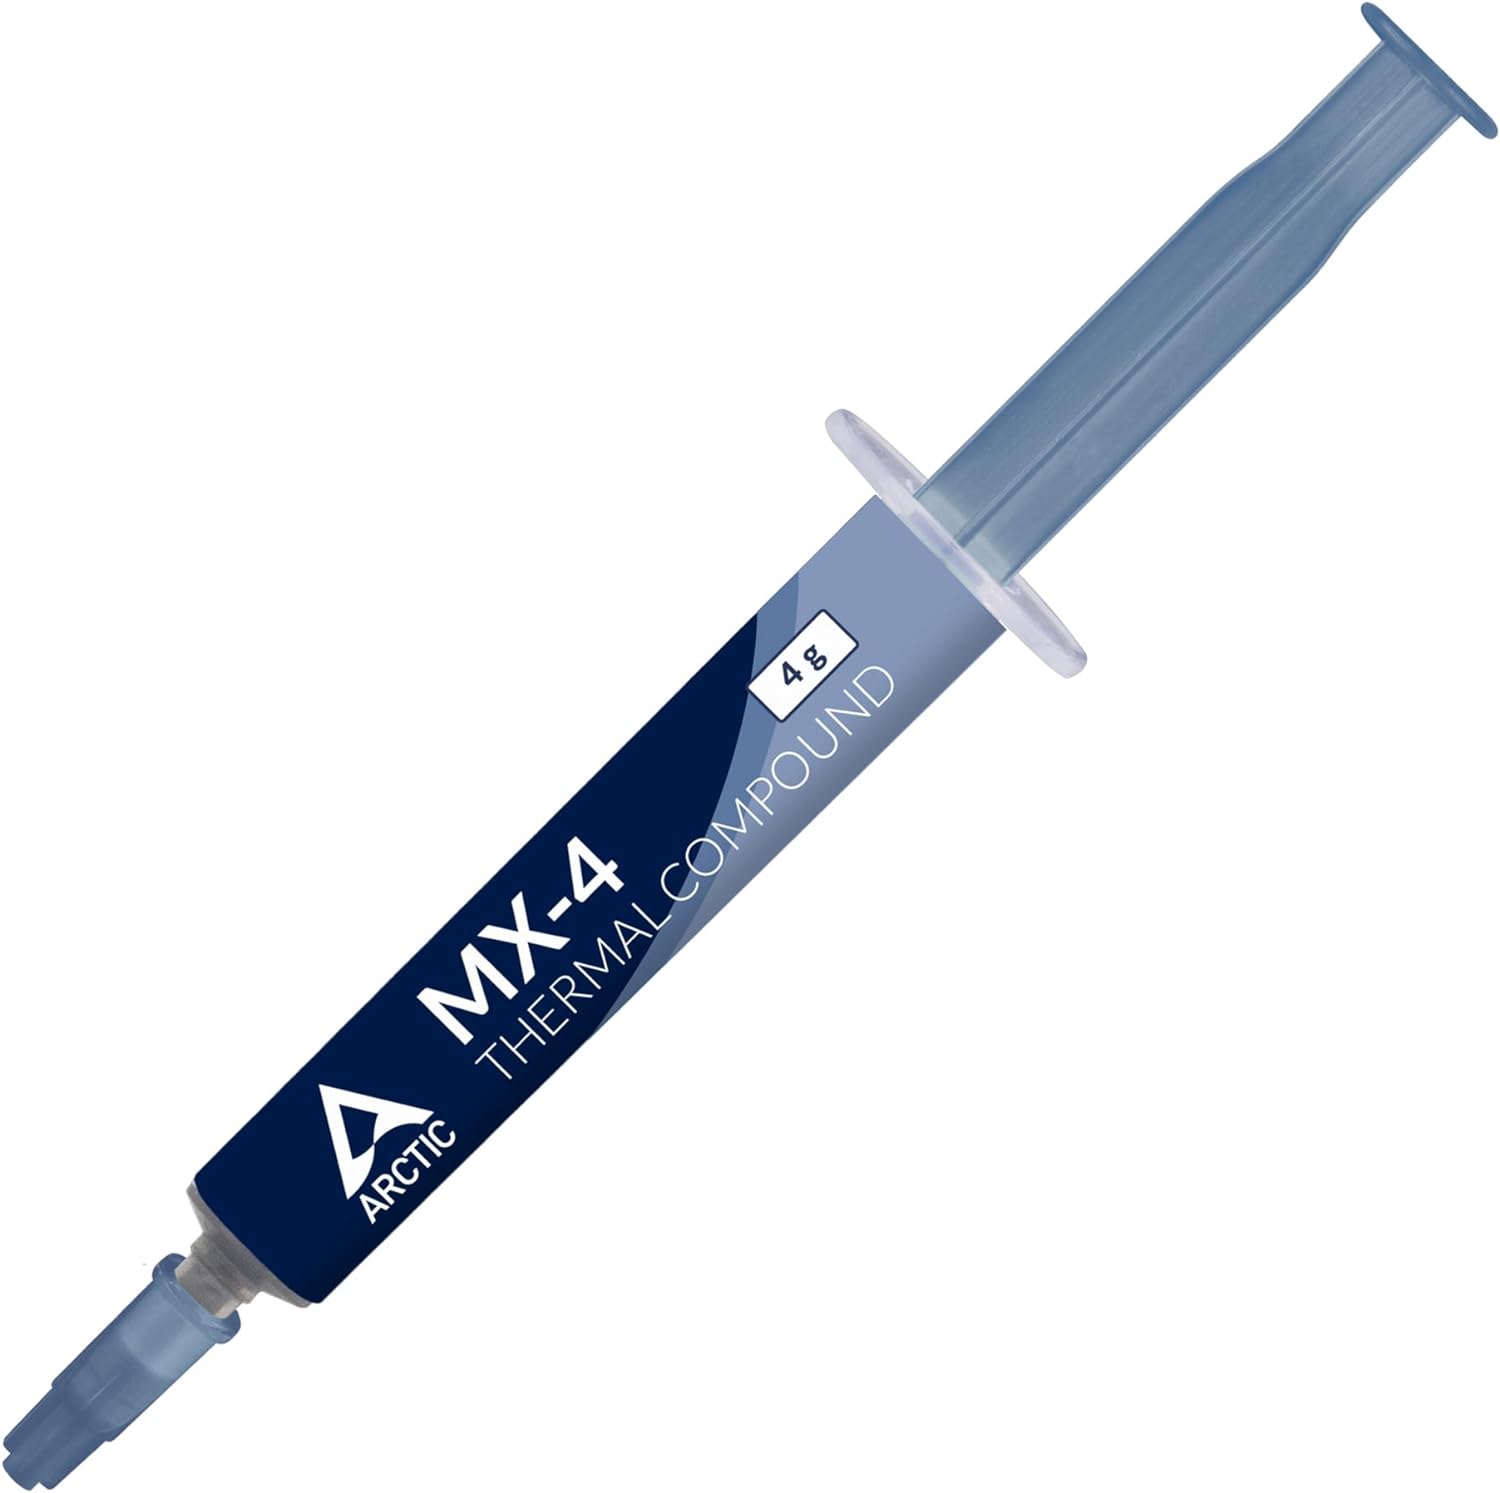 Arcitic MX-4 Thermal Paste